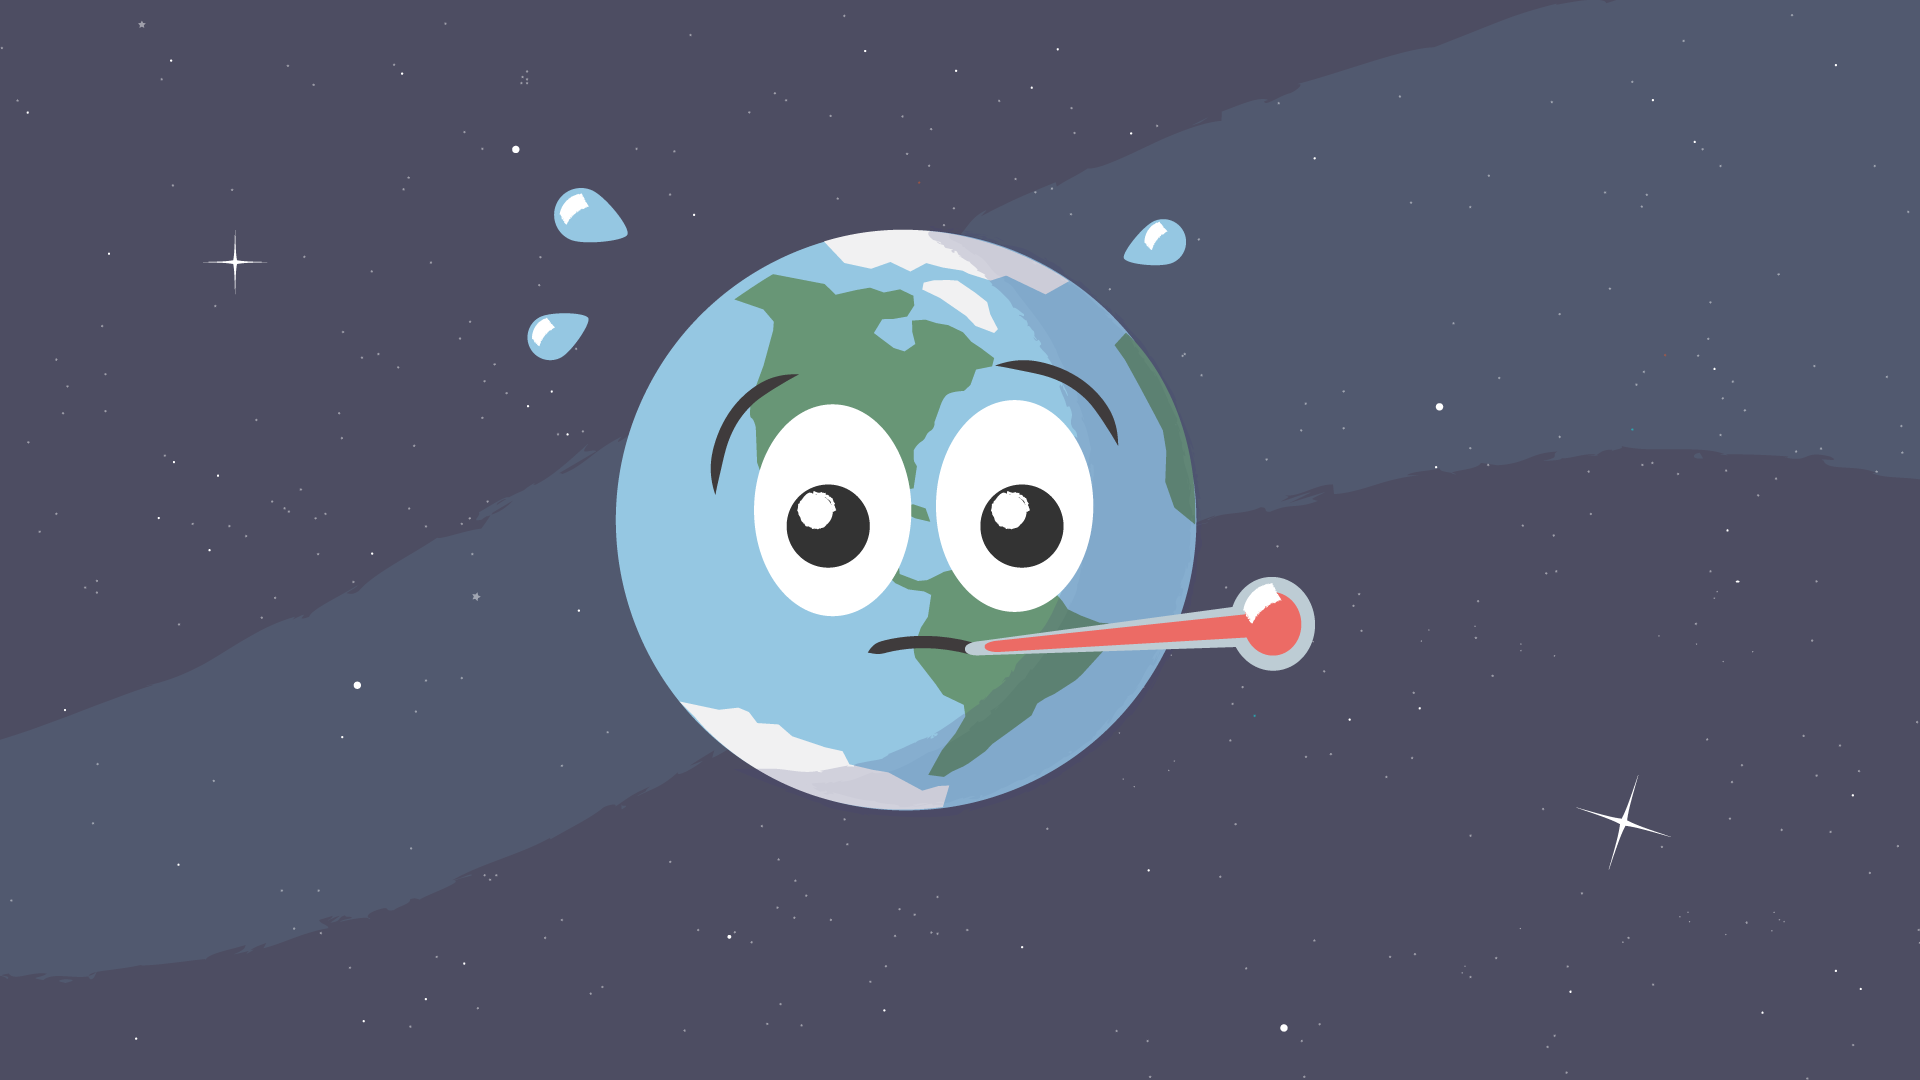 A cartoon Earth has a thermometer in its mouth reading a high temperature. The Earth shows North and South America in green with a light blue ocean and white snow and ice-covered poles. There are white and black cartoon eyes, black-line cartoon eyebrows, and a black-line cartoon mouth, making a concerned face. The thermometer is clear colored, is a long stick with a round ball at the end, and is colored in red inside. Three light blue water droplets are off the top of the Earth to show sweat. The blue background has white stars in it.